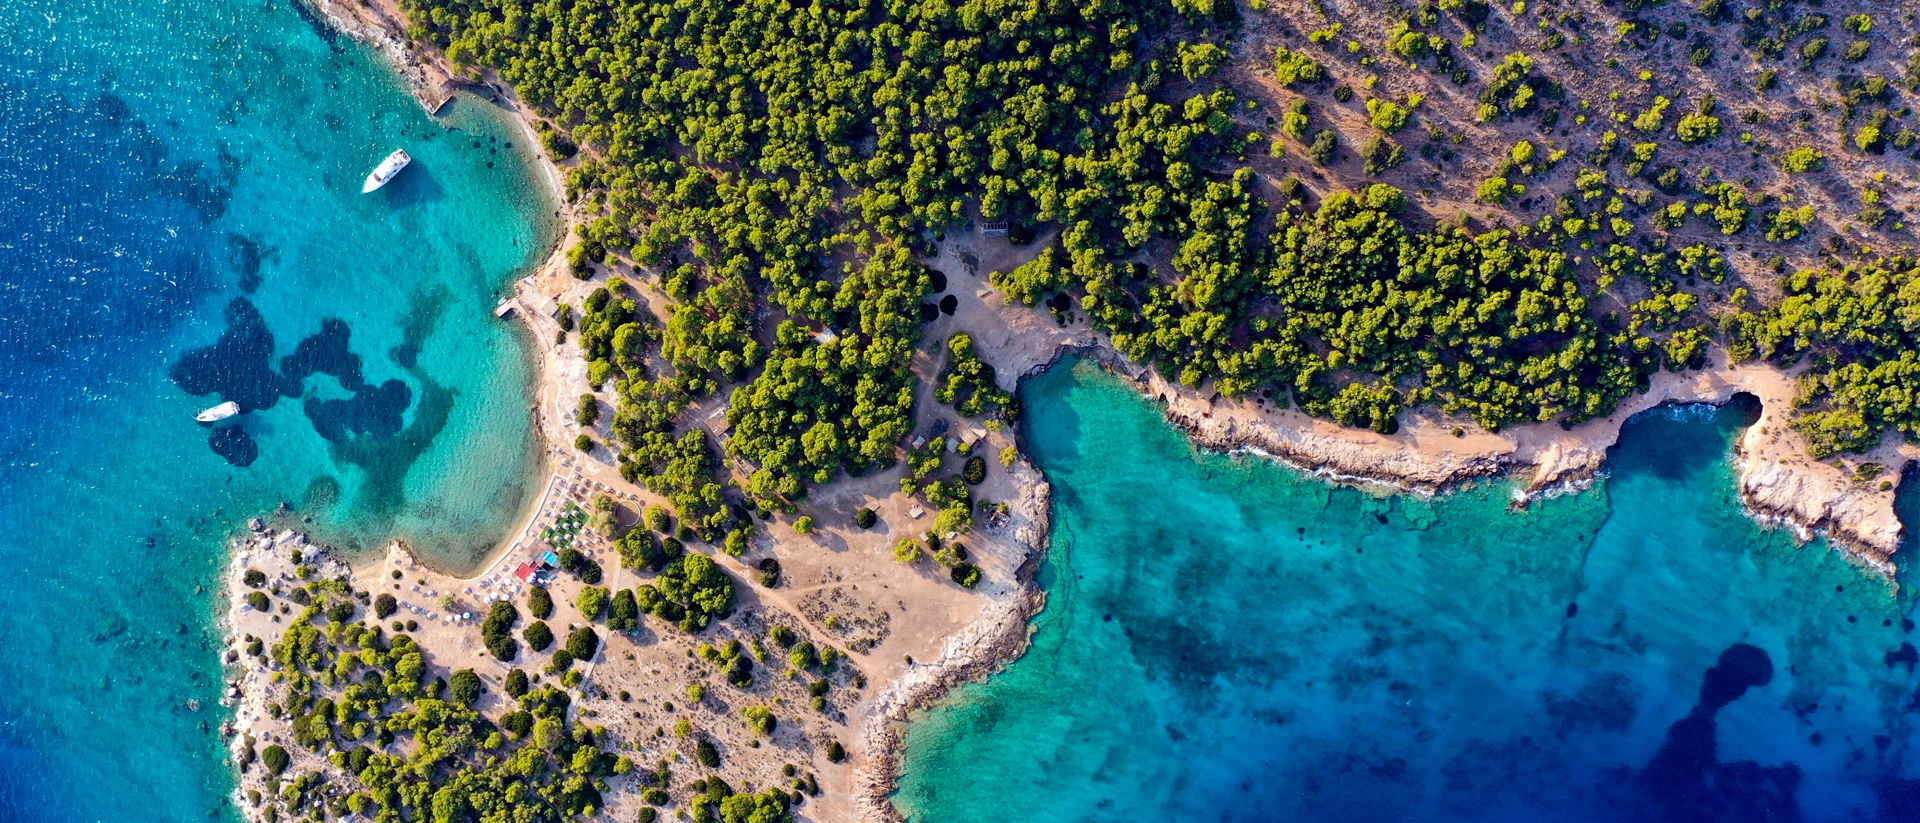 Athens crystalline waters and vegetation sea vacation